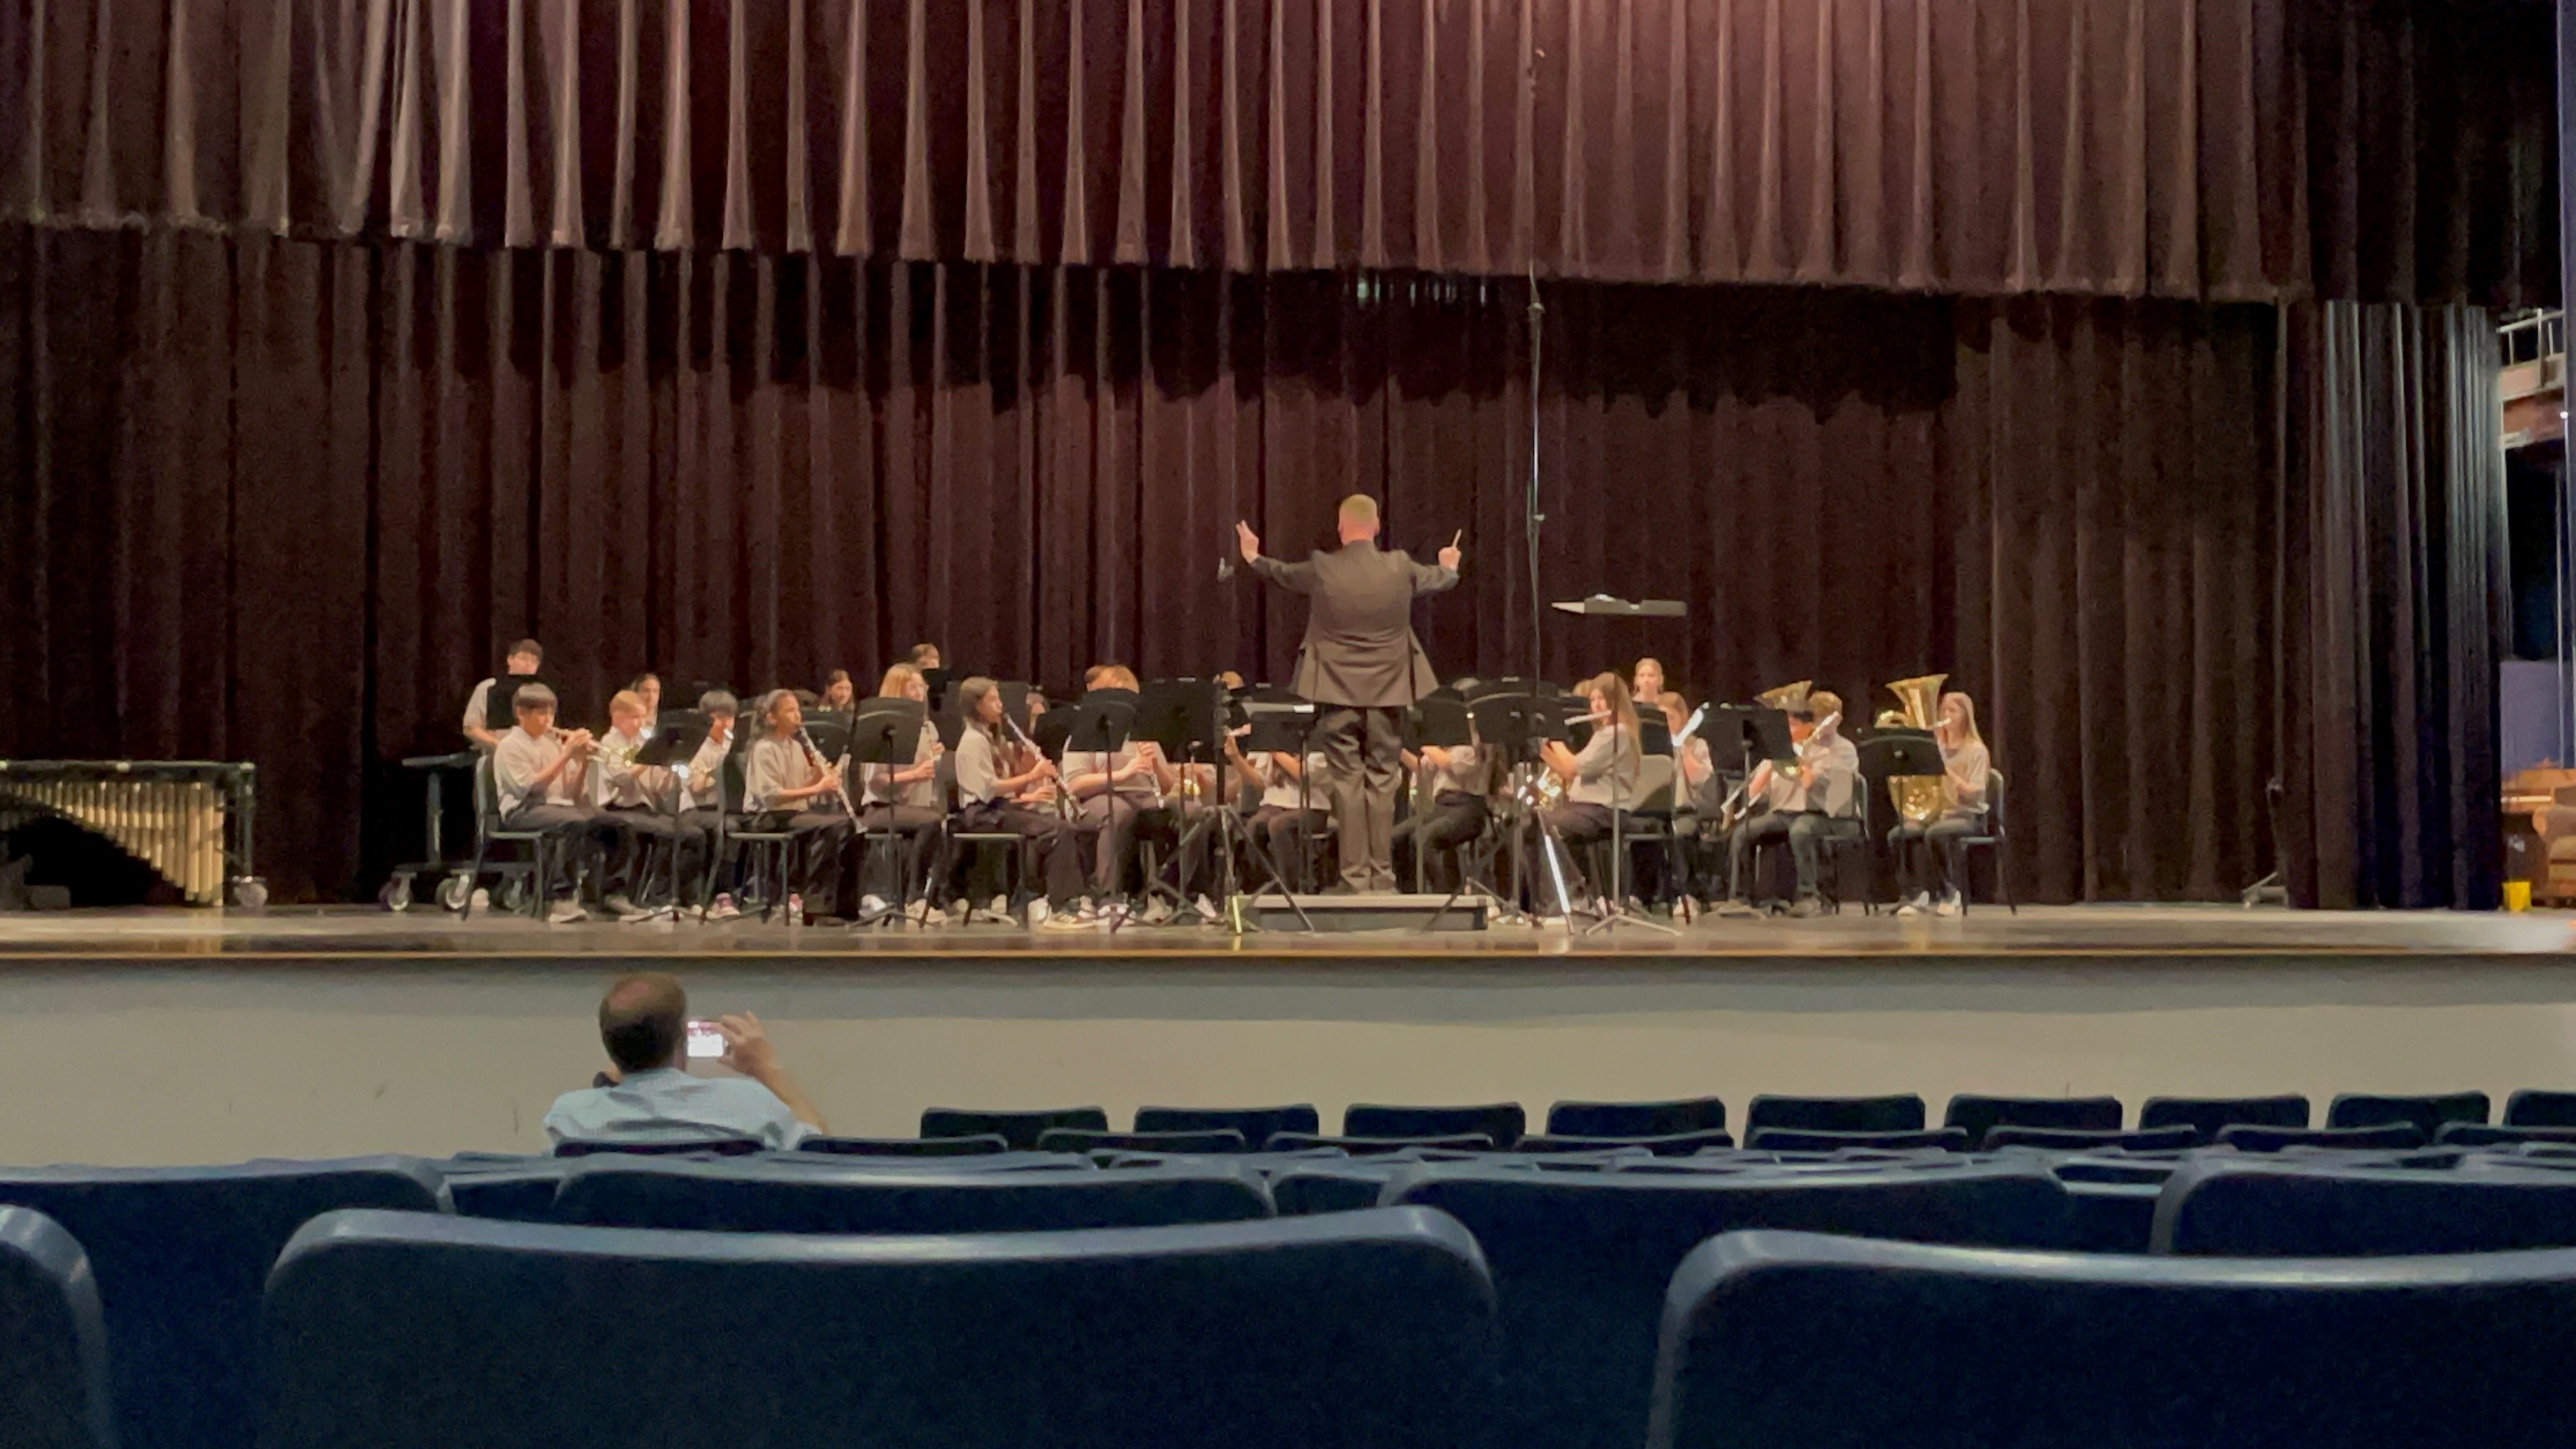 Mr. Moellendorf conducting the middle school band at the Region 32 UIL Concert Evaluation.